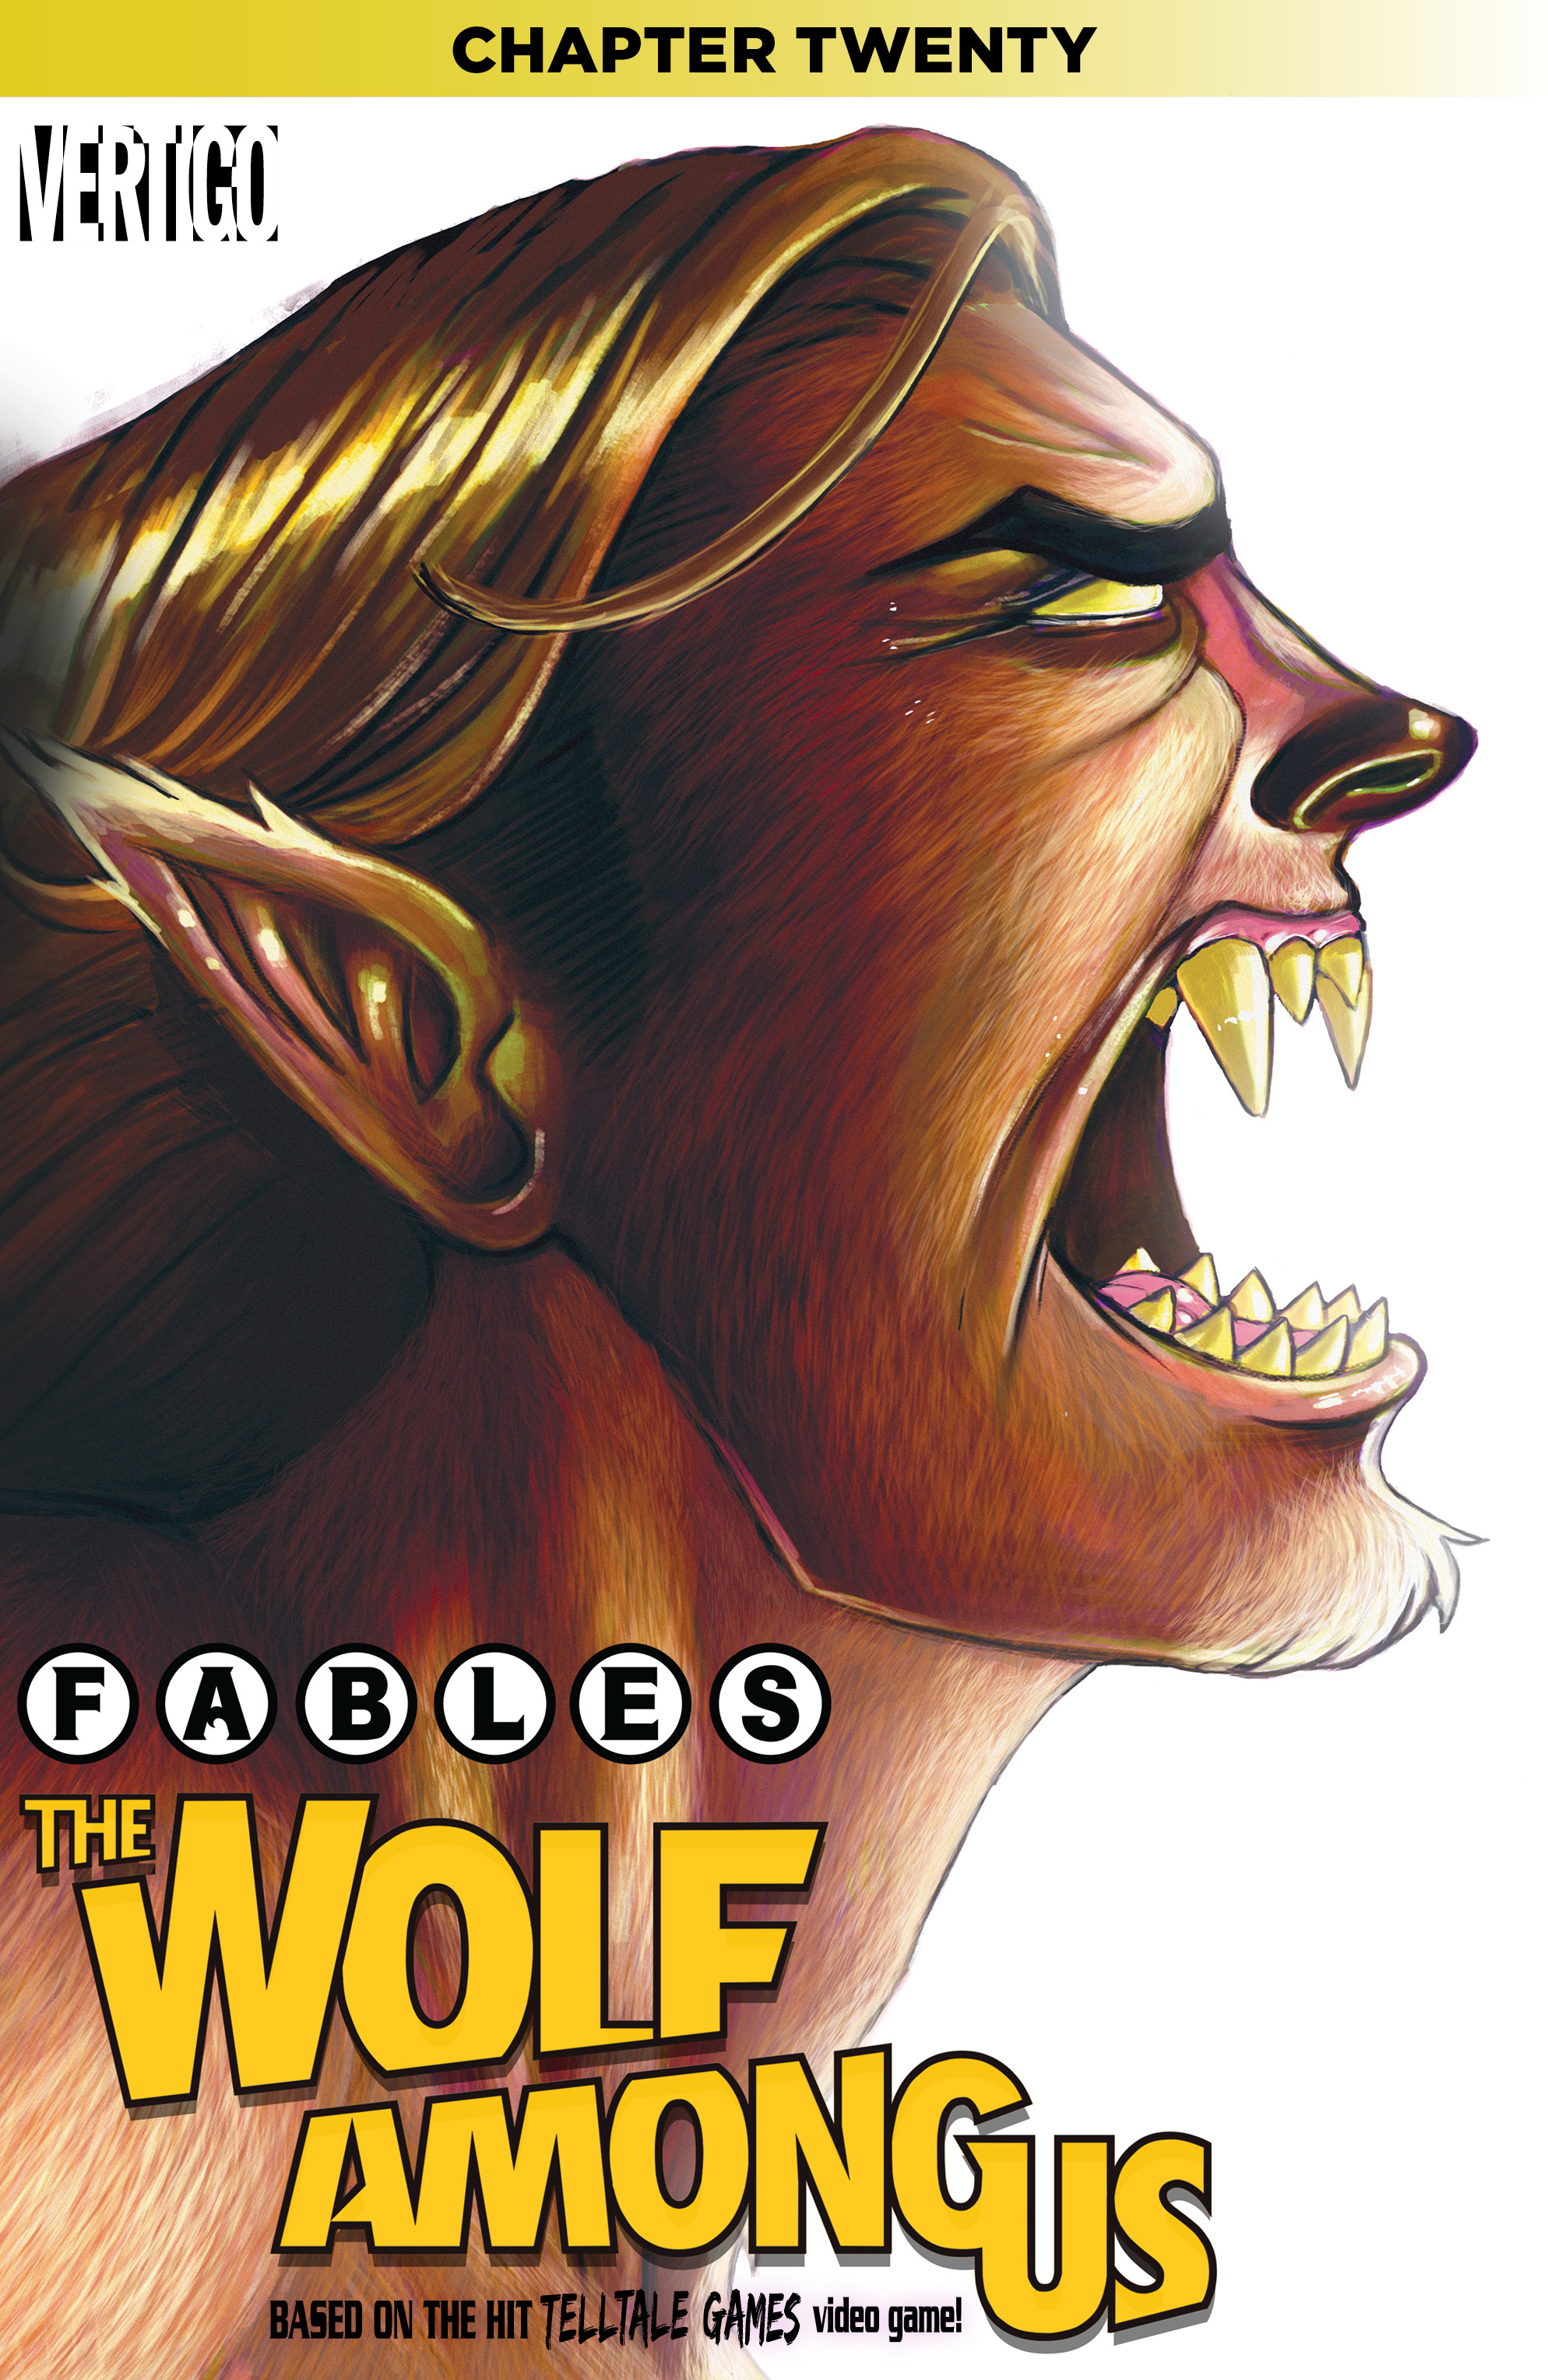 Fables: The Wolf Among Us #20 preview images